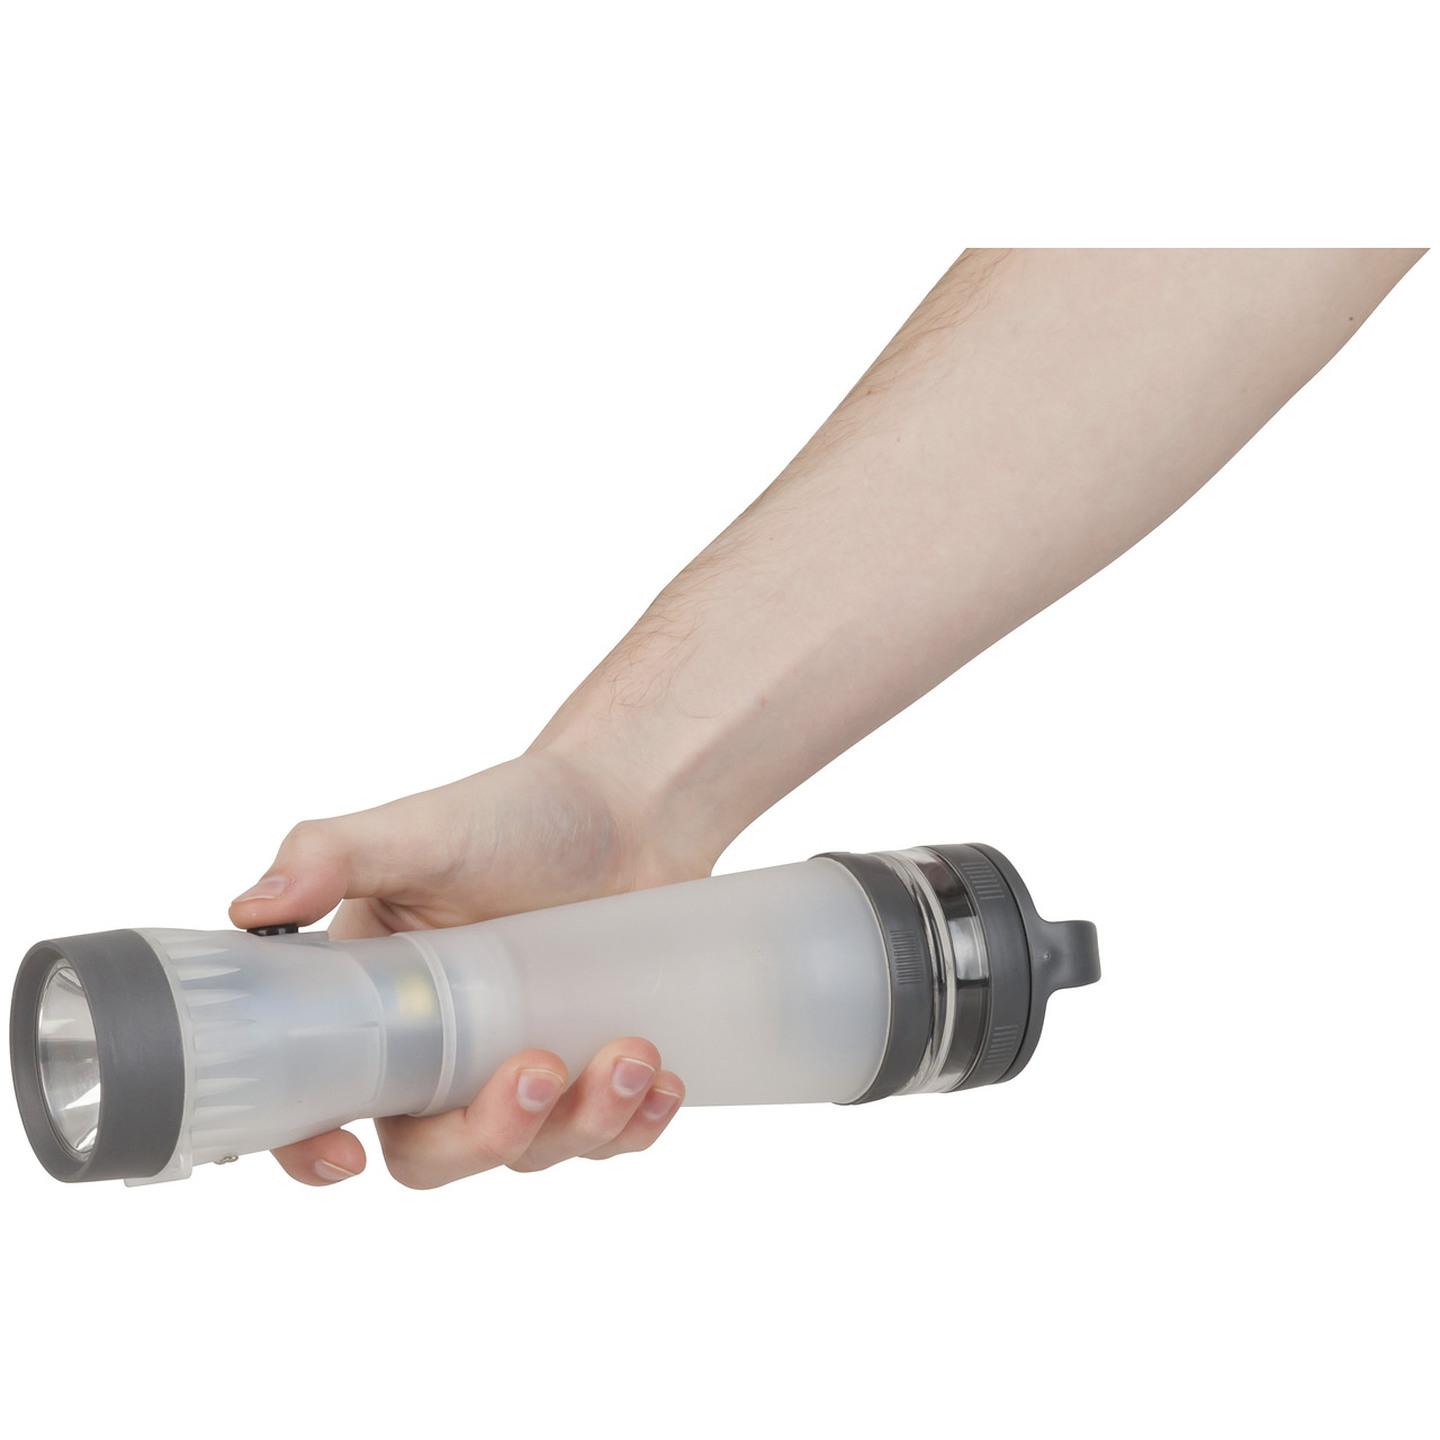 6 in 1 Survival Torch with Storage compartment